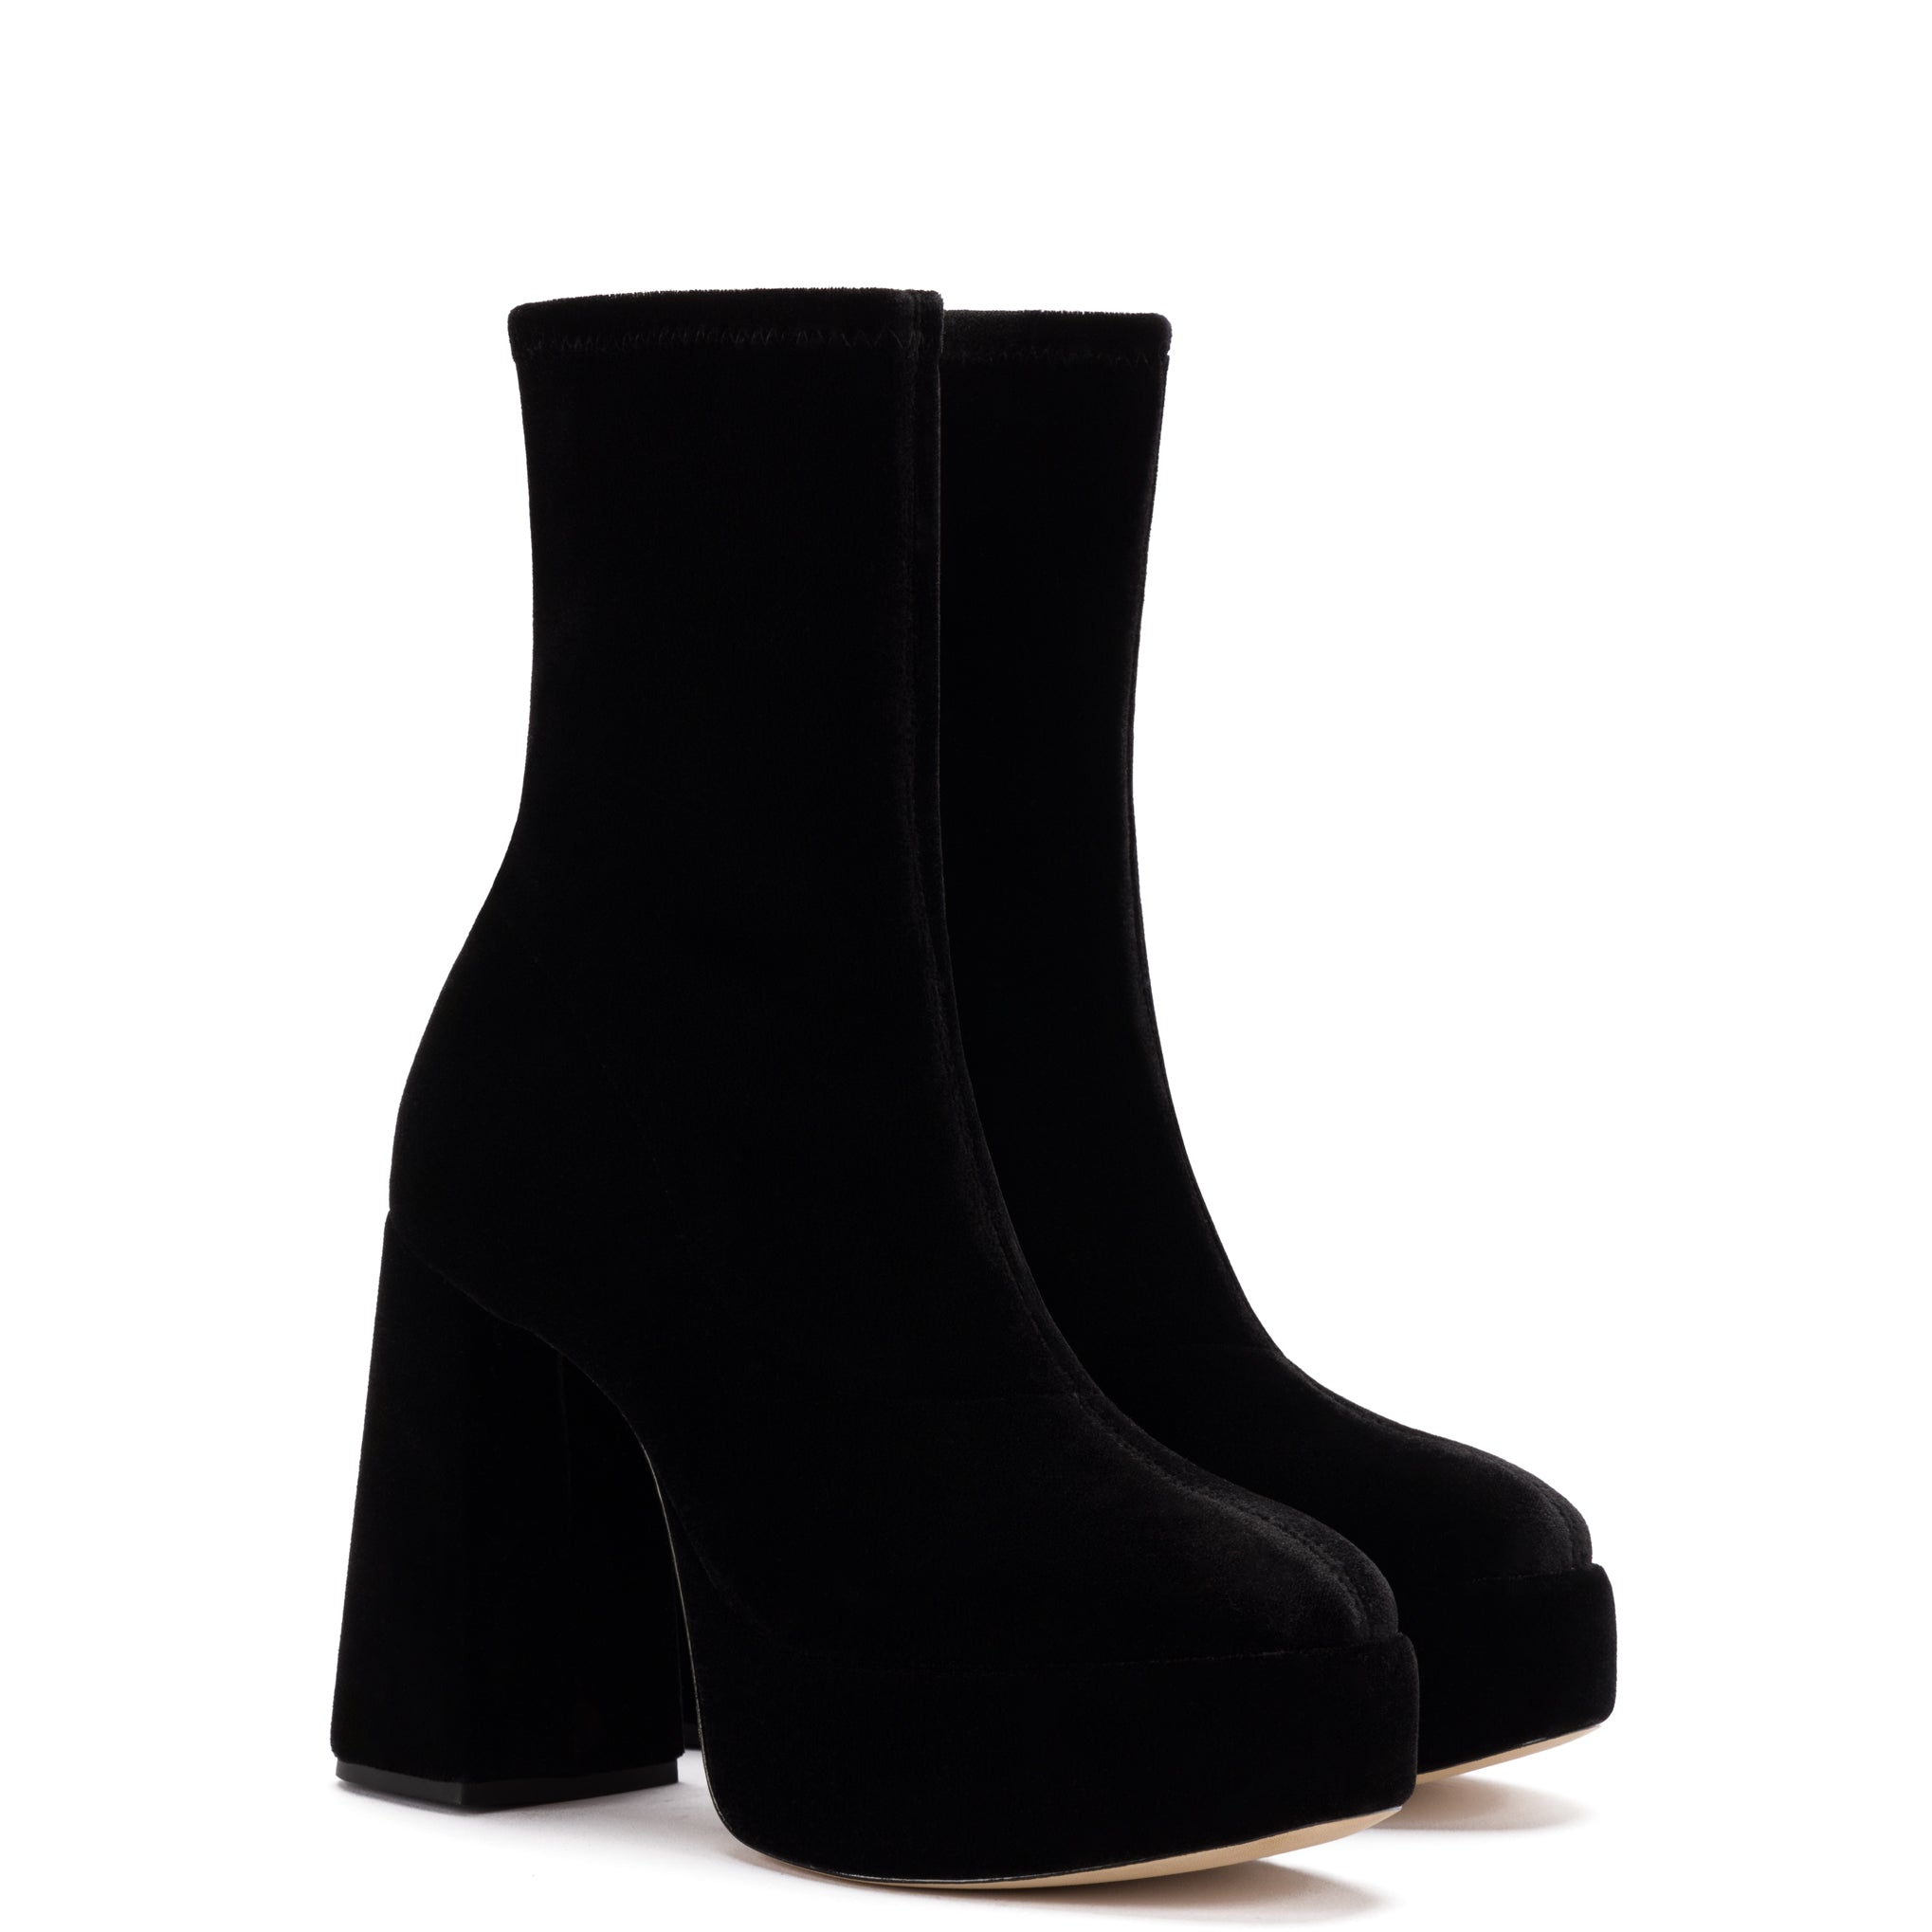 Dildi Otto suede ankle boots